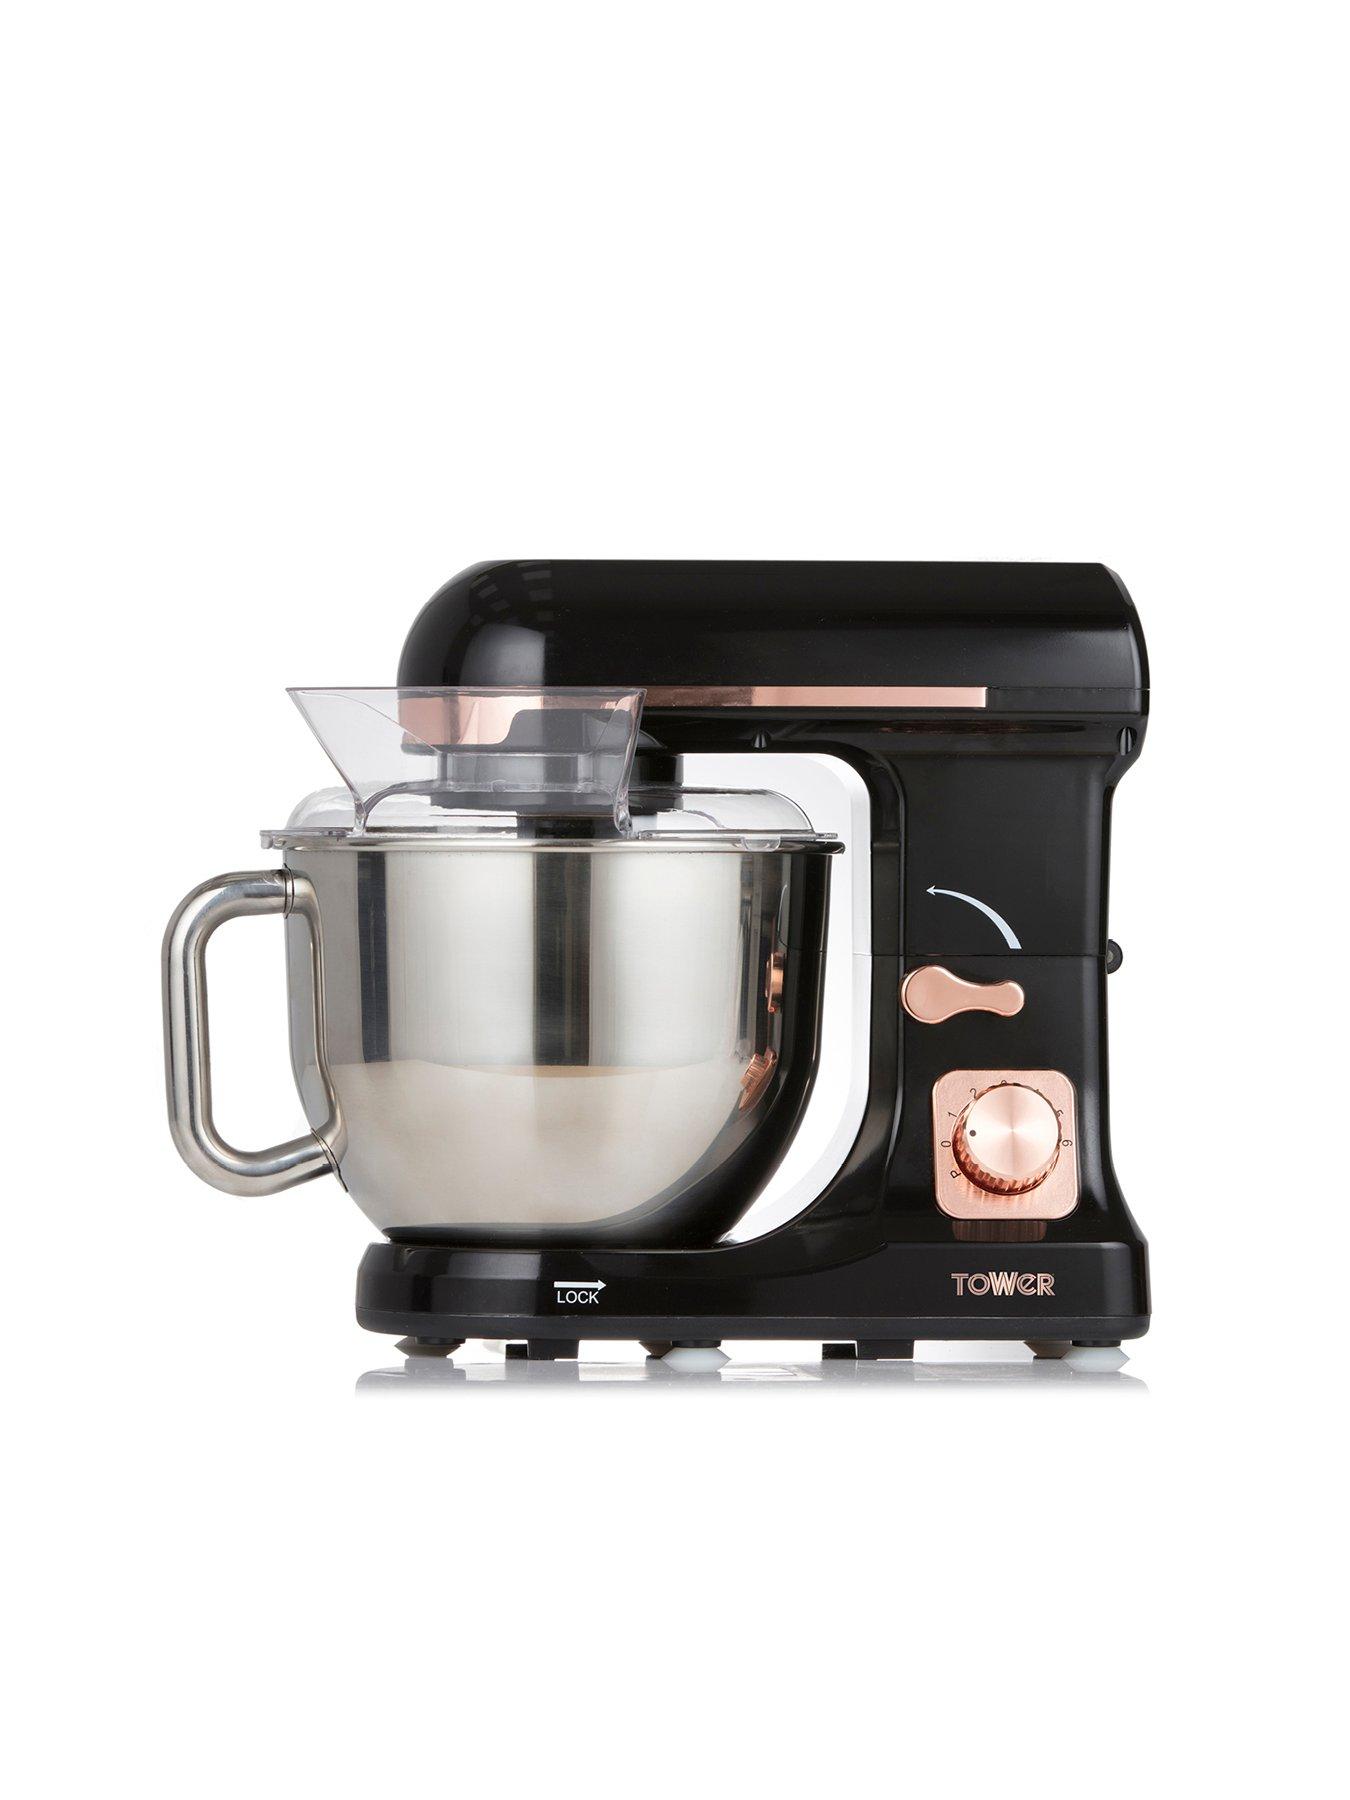 Tower 1000W Stand Mixer - Rose Gold